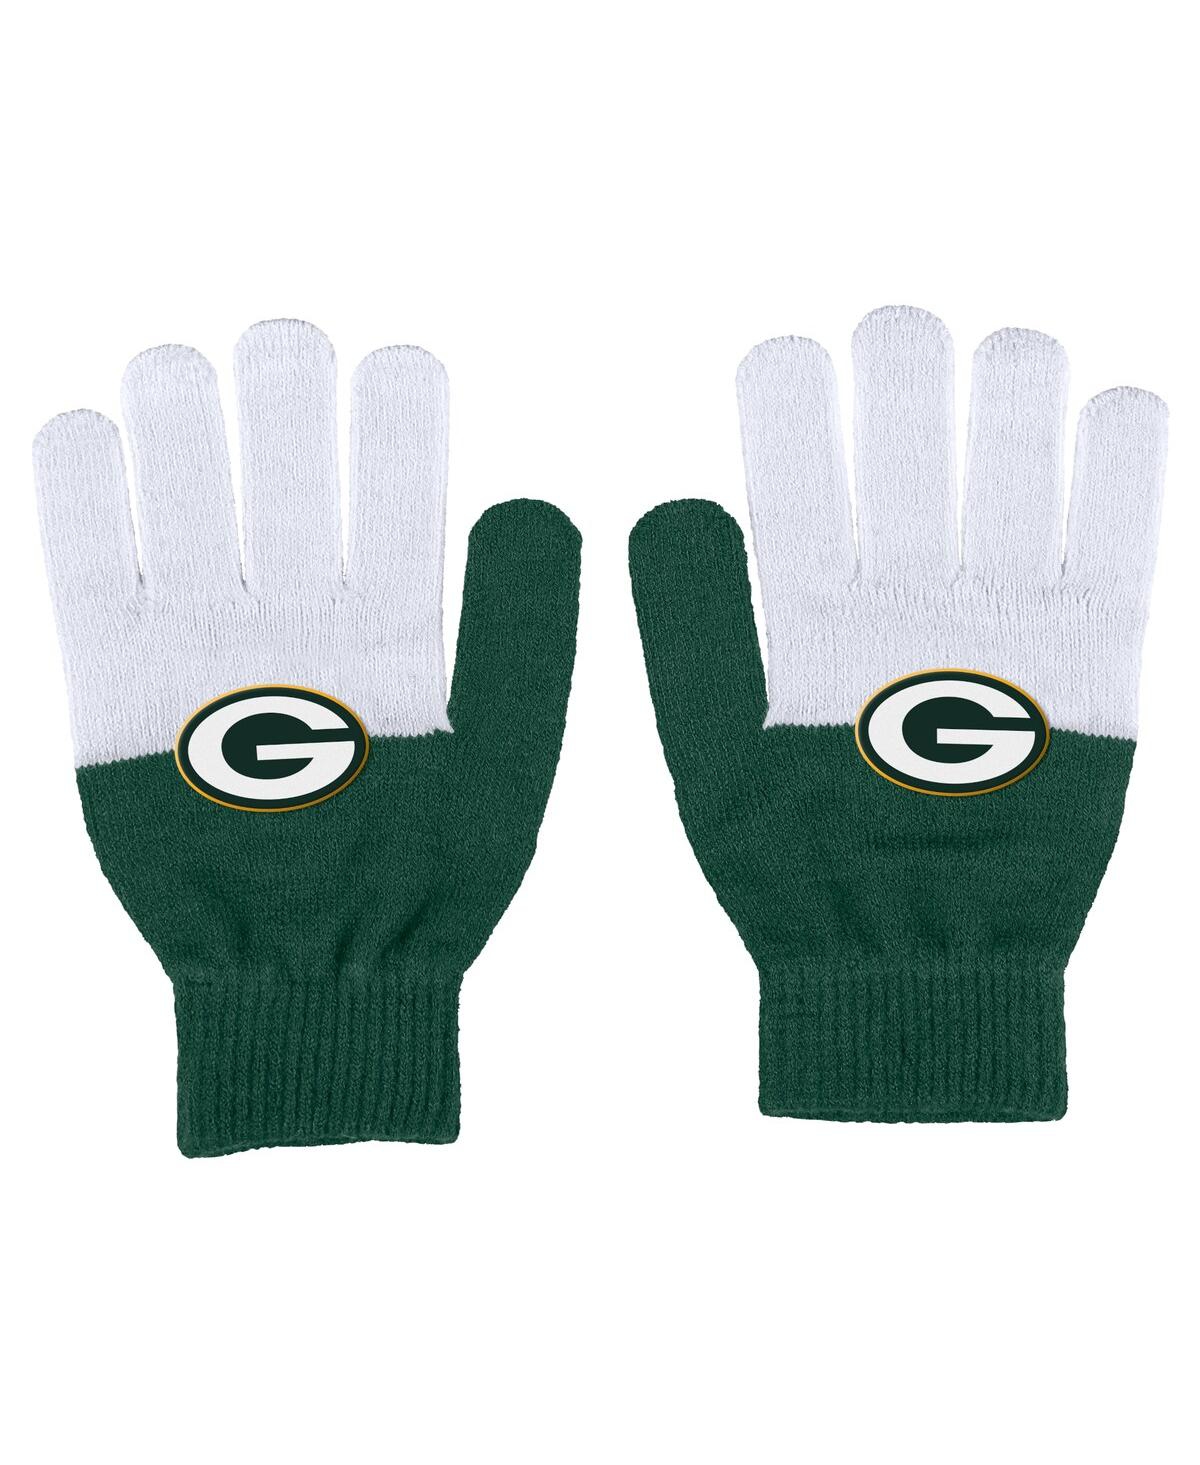 Women's Wear by Erin Andrews Green Bay Packers Color-Block Gloves - Green, White